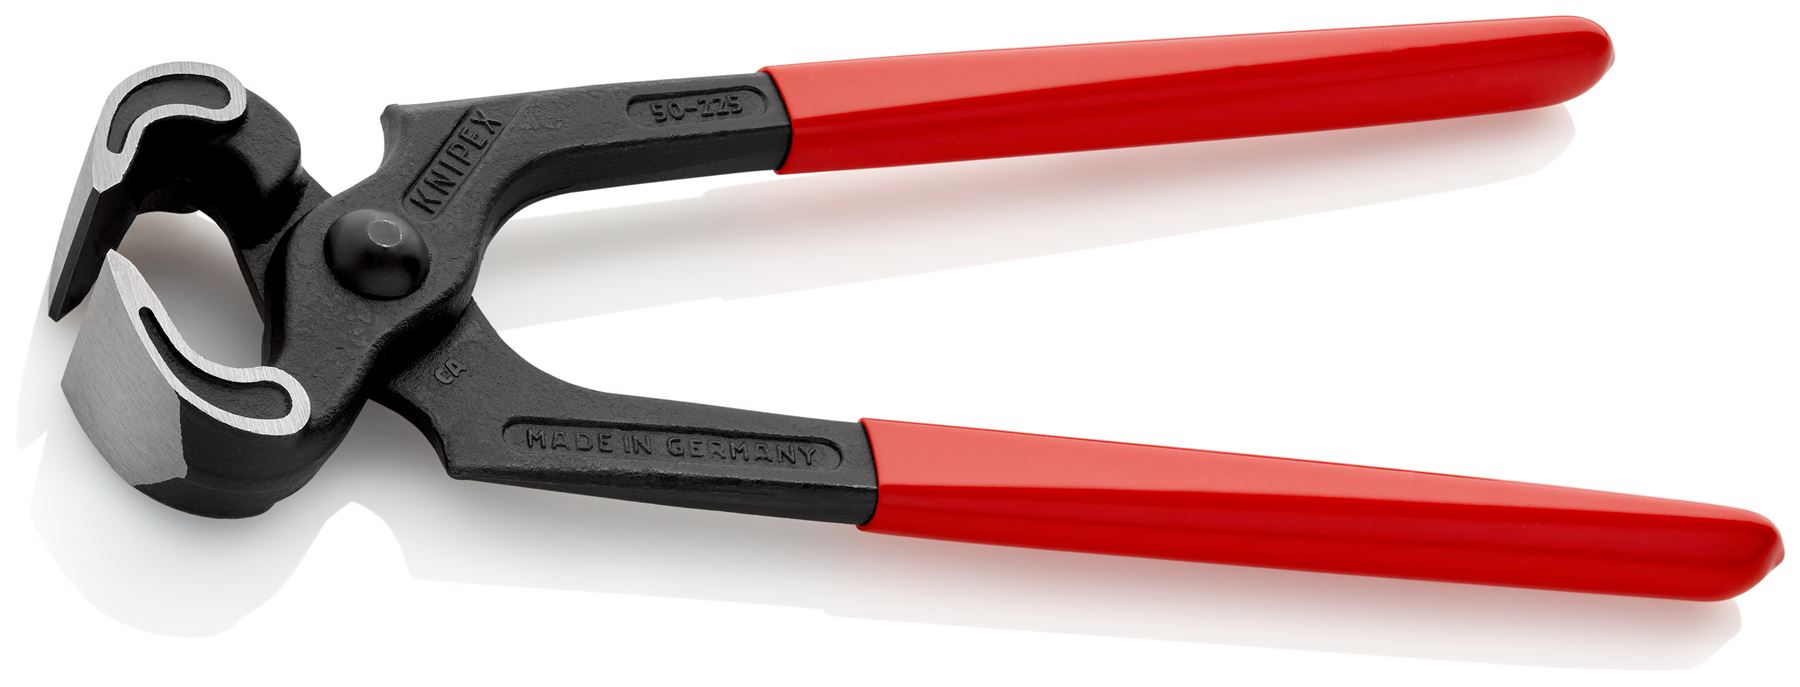 KNIPEX Carpenters Pincers 225mm Plastic Coated Handles 50 01 225